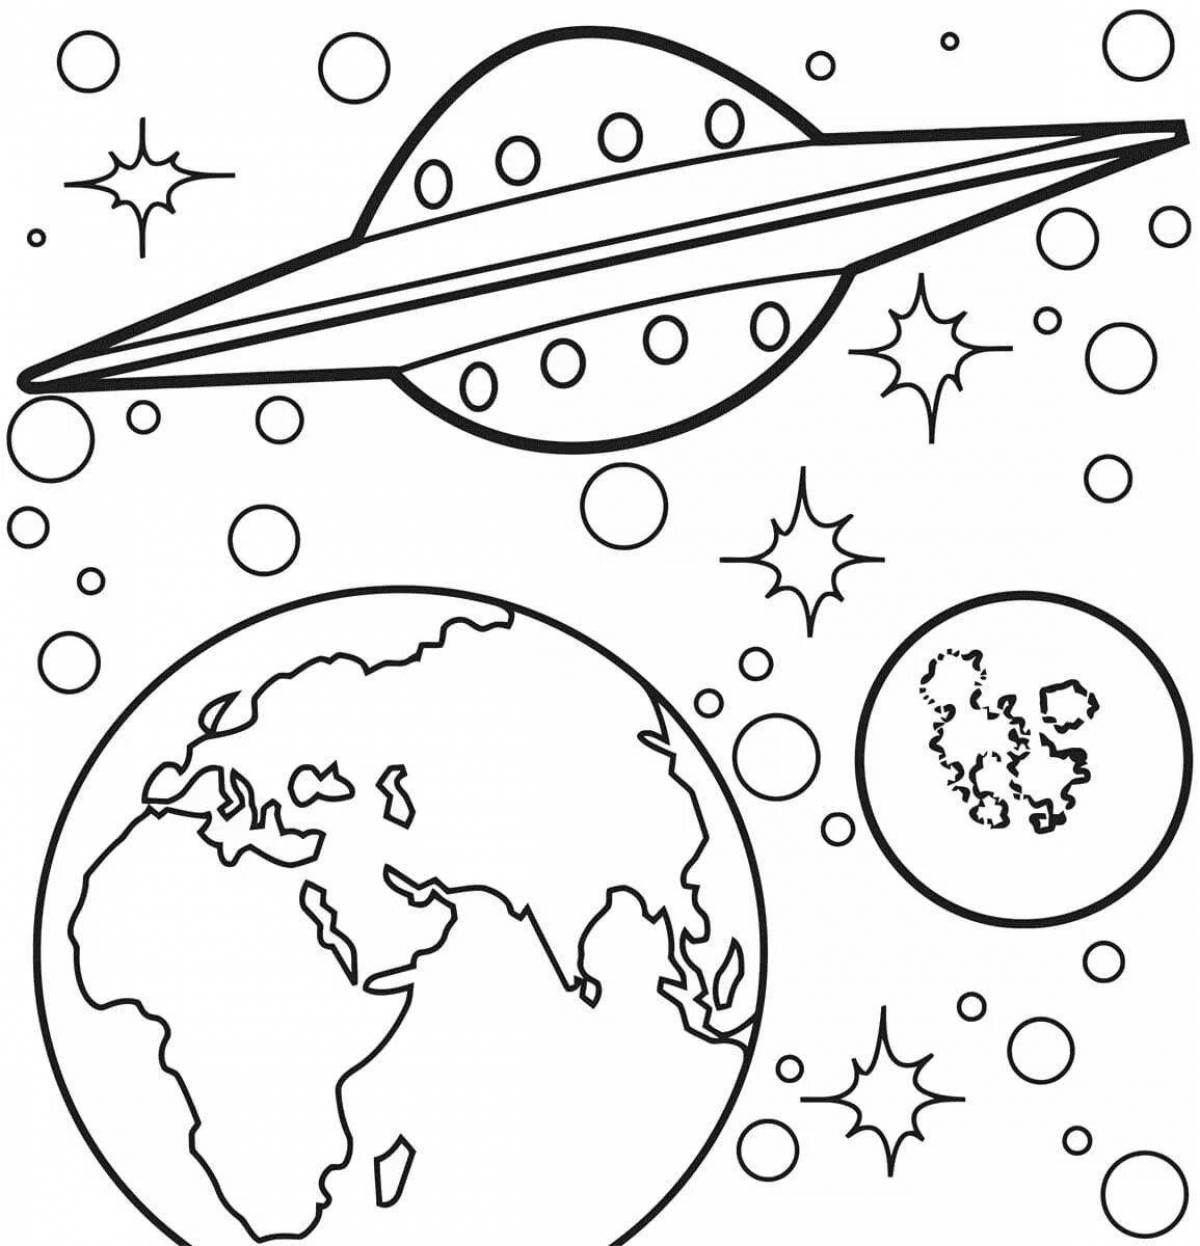 Majestic space coloring book